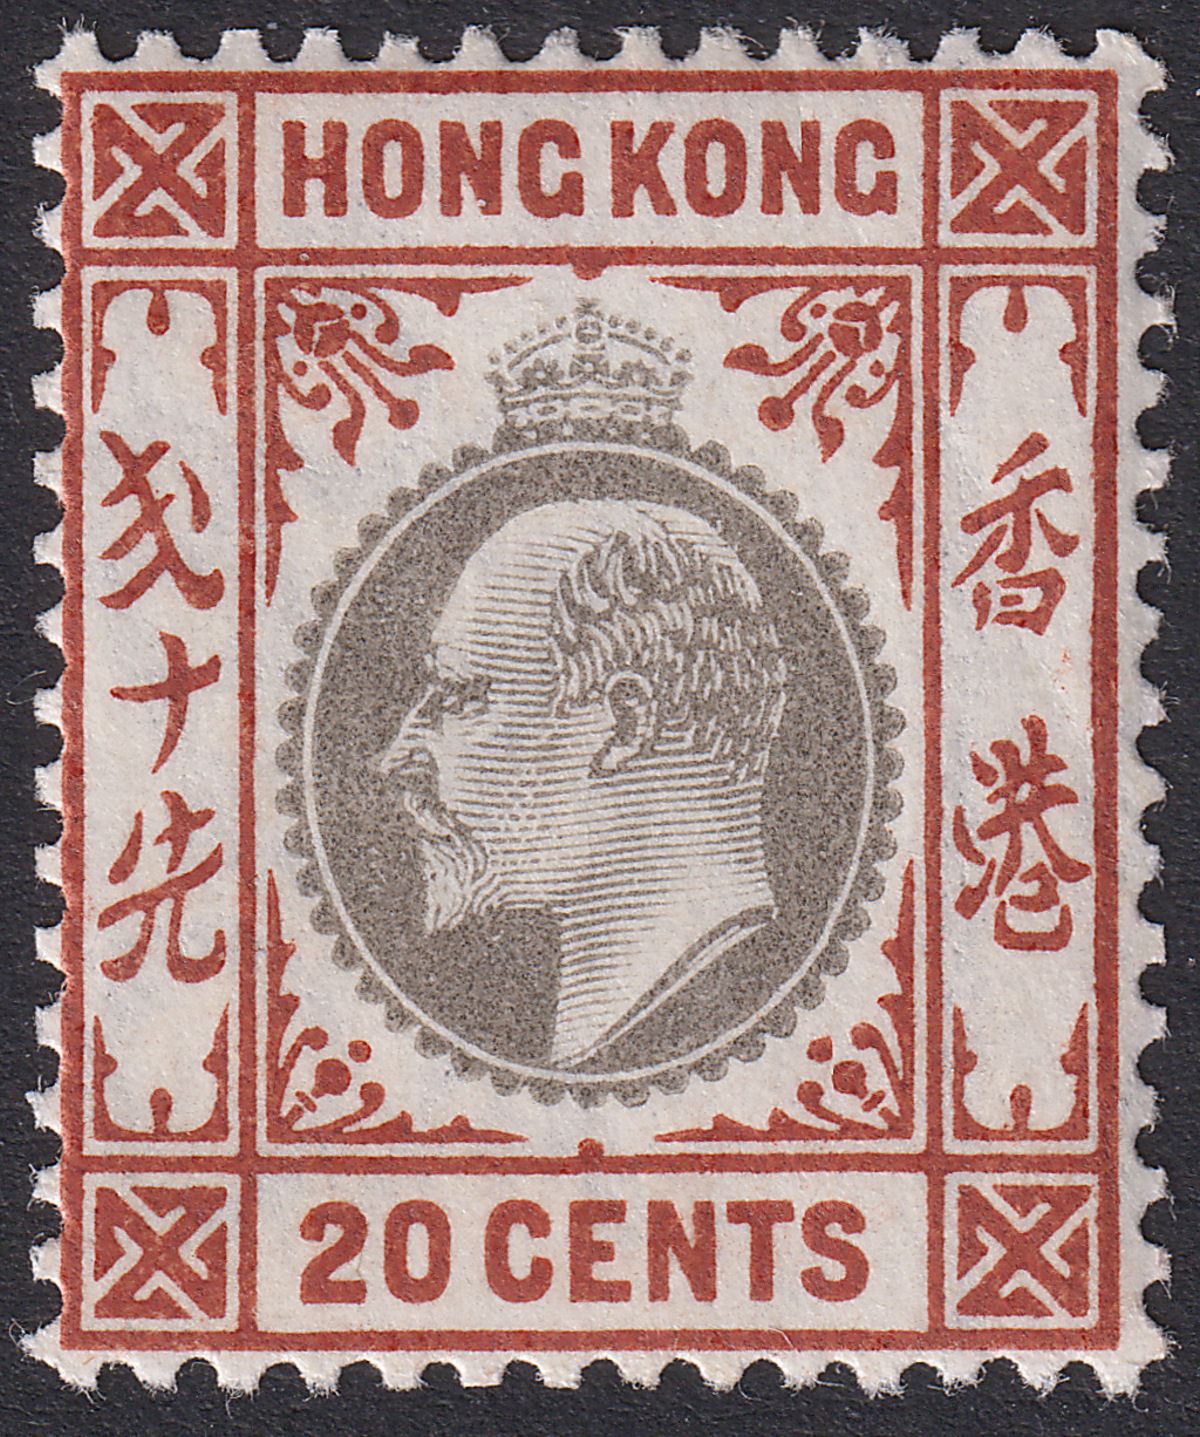 Hong Kong 1903 KEVII 20c Slate and Chestnut Mint SG69 cat £65